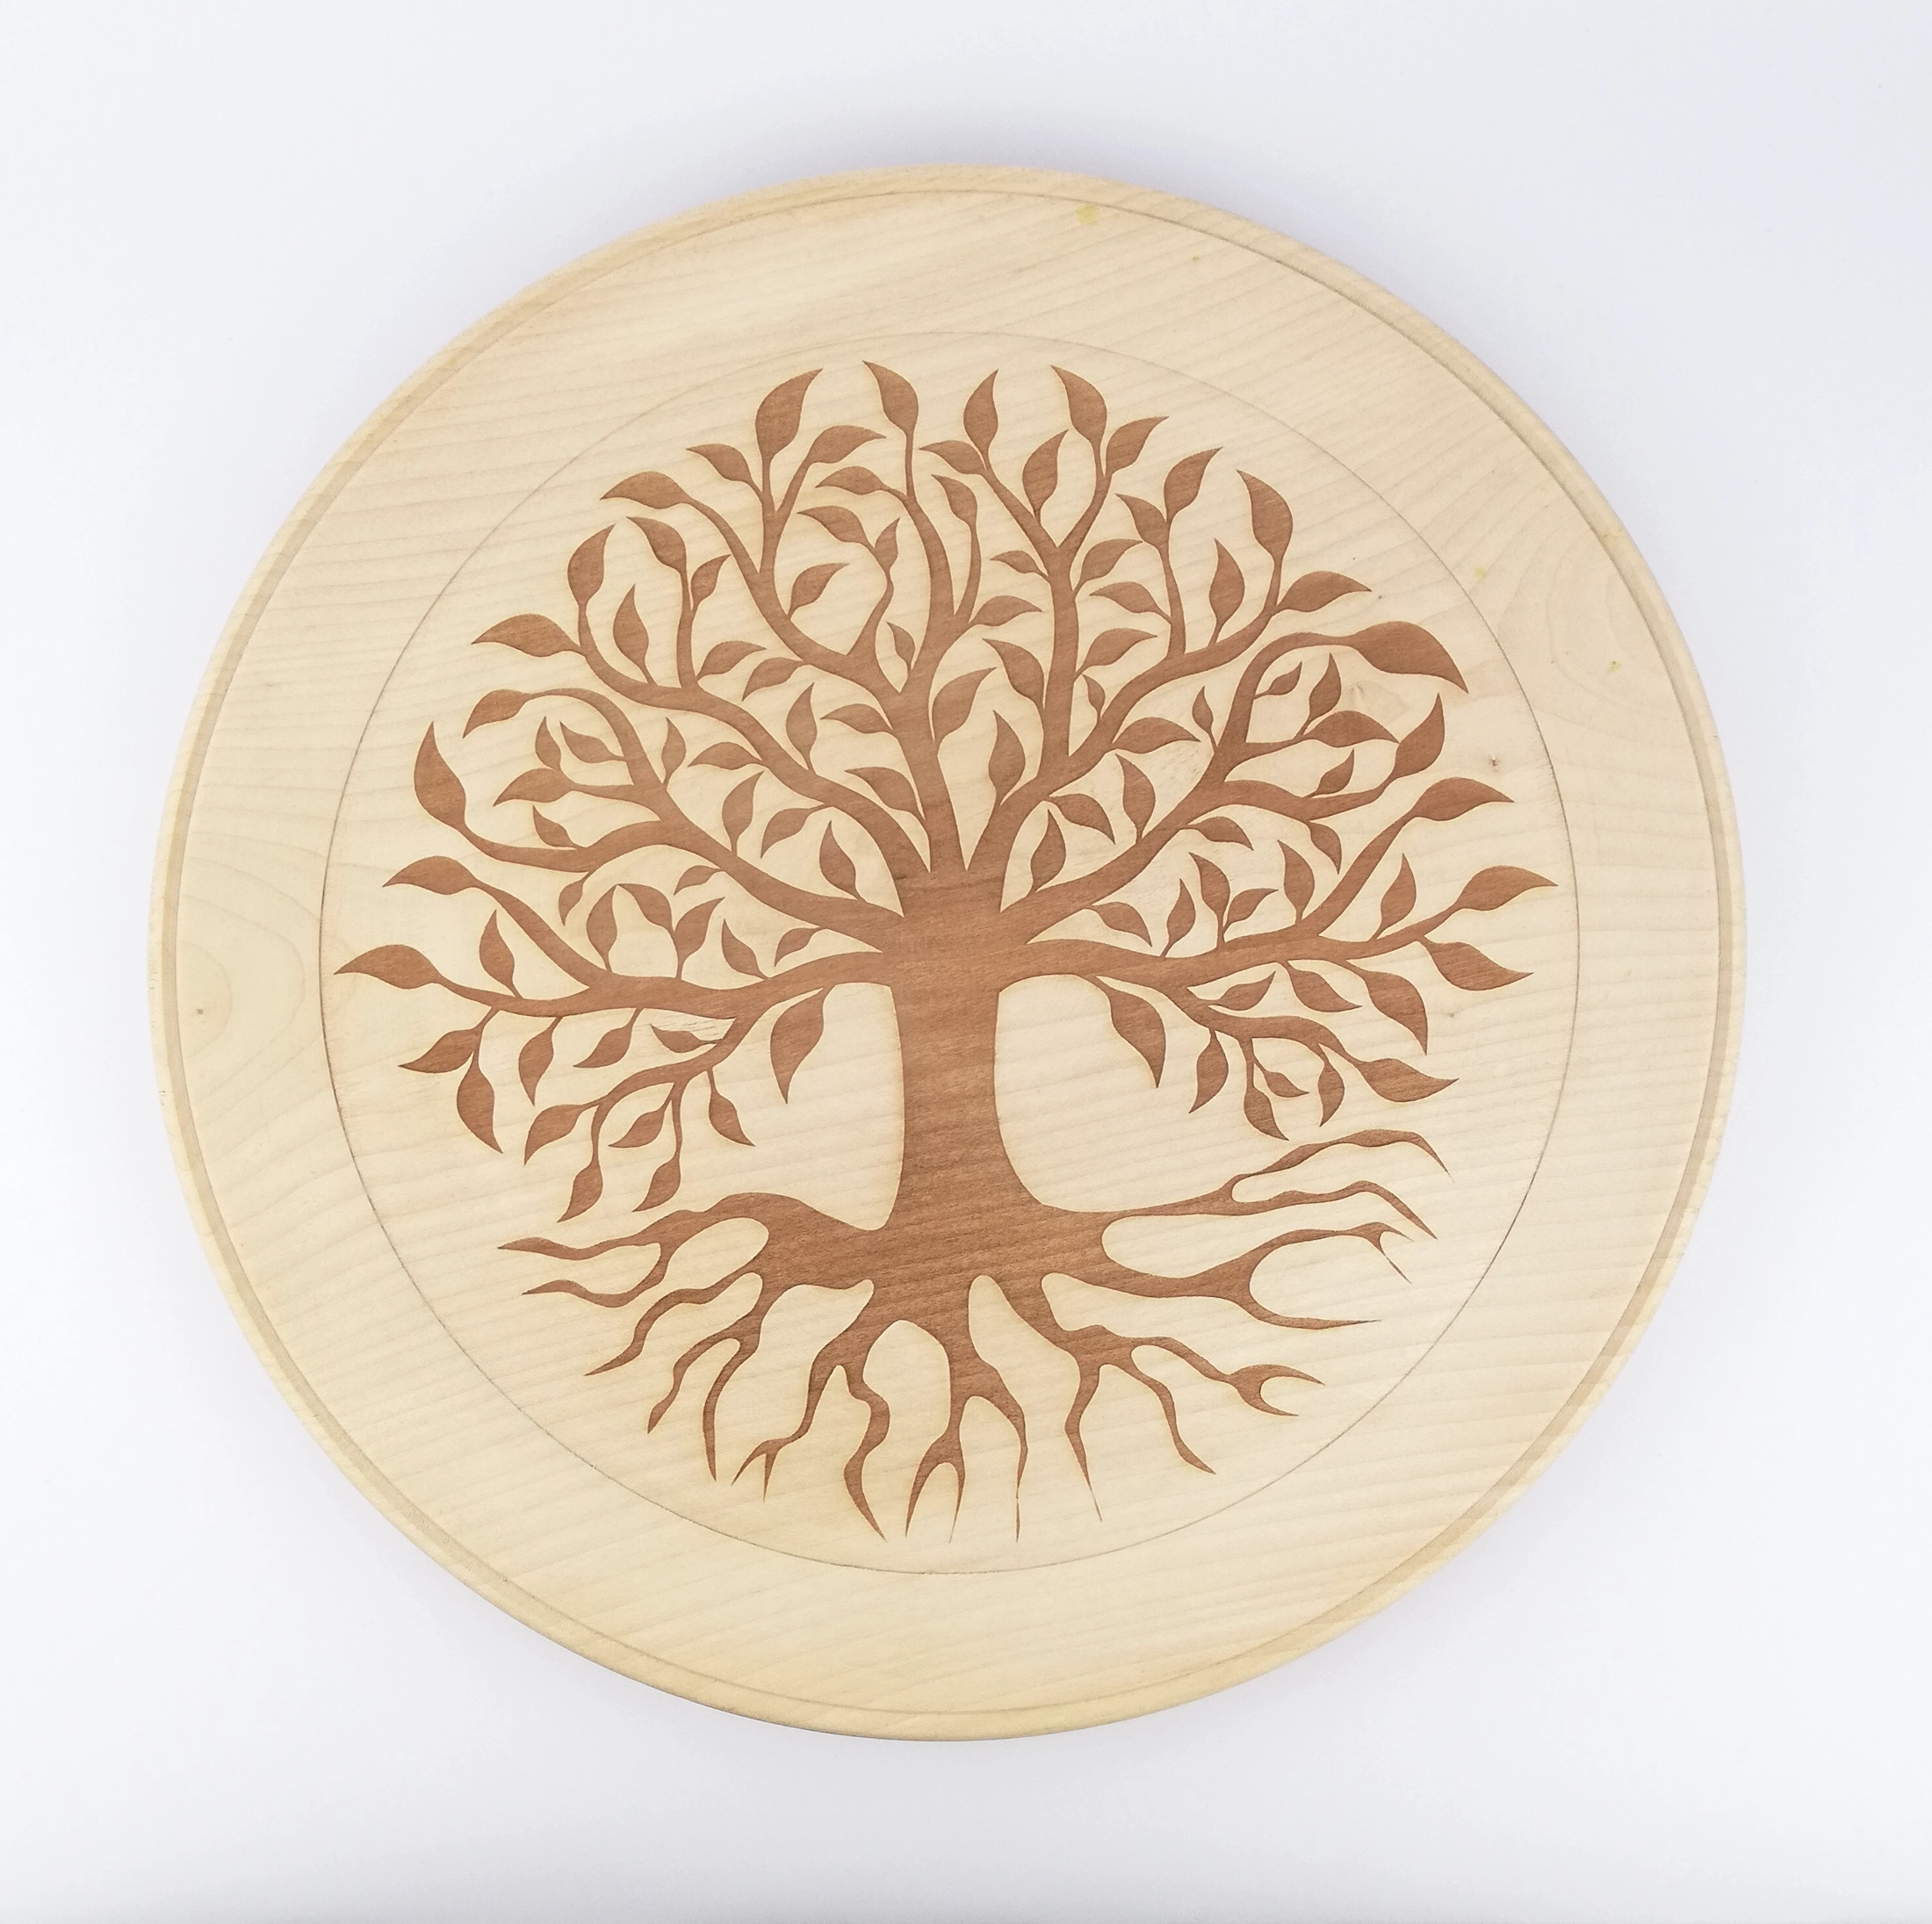 Tree of life (version 1) on a big plate (32cm/12.6in in diameter), front.